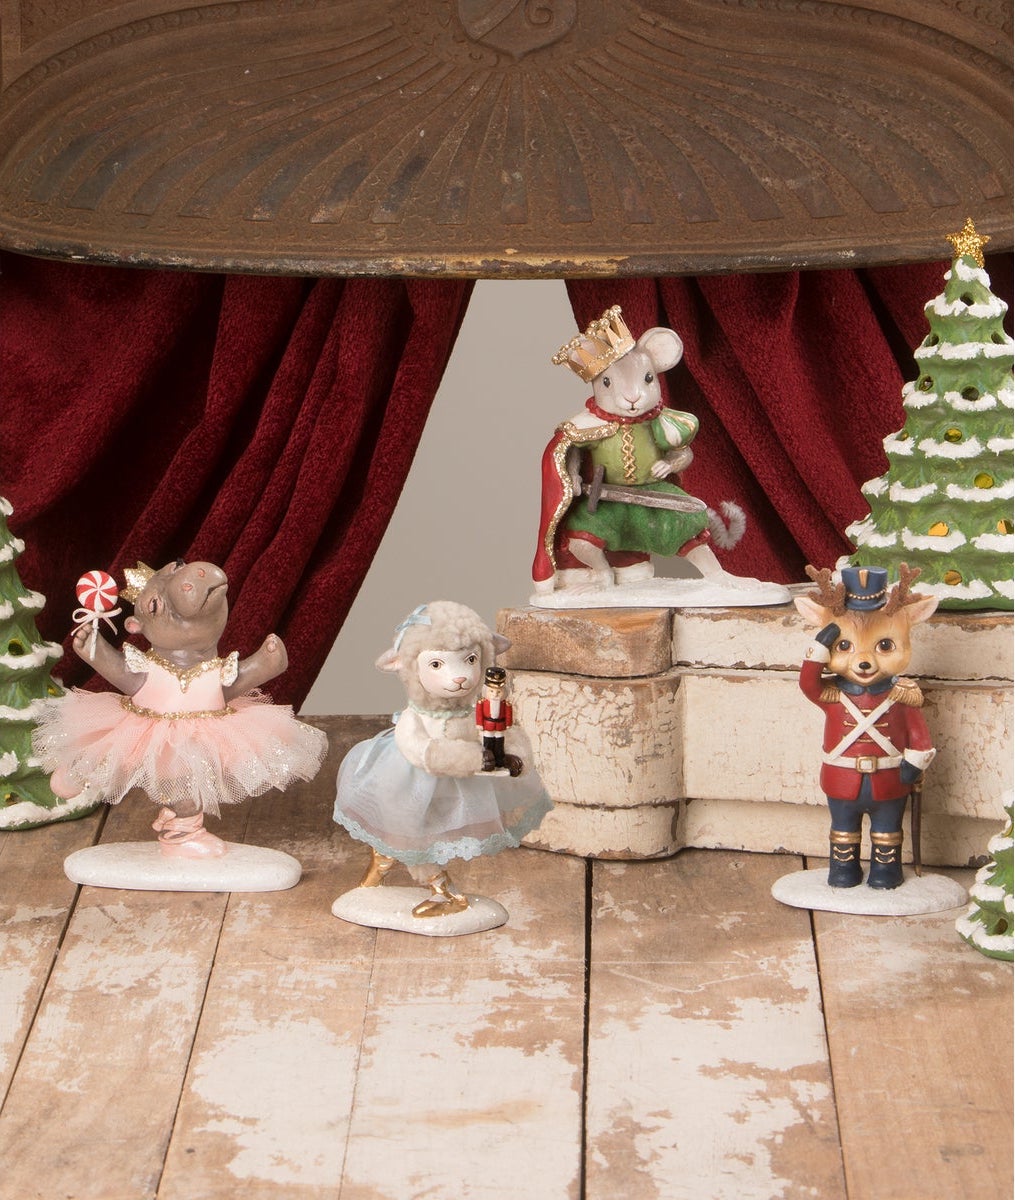 Nutcracker Suite Ballet Animal Figurine by Bethany Lowe, Hippo, Sheep, Reindeer, Mouse